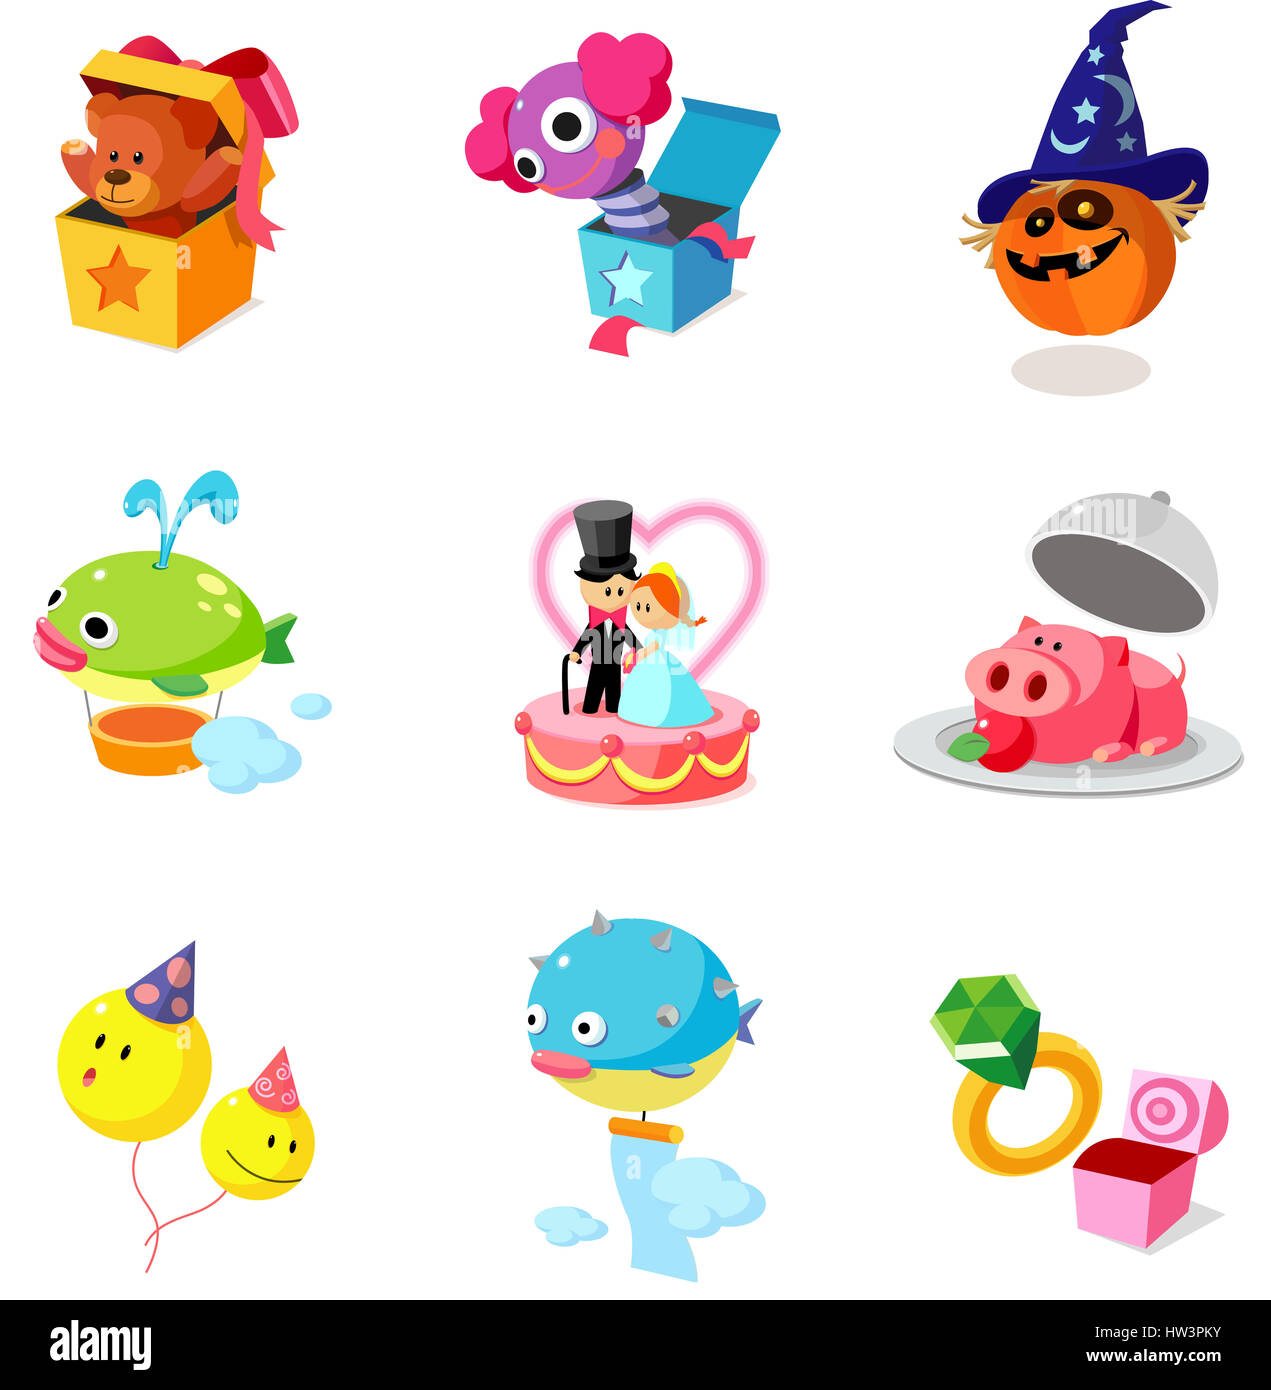 animal themes,animal,balloon,bear,bowl,box,cake,dessert,childhood,clipart,close-up,color,colour,color image,computer graphics,computer icon,diamond,digitally generated image,engagement ring,figurine,fish,food and drink,nutrition,nourishment,graphics,group Stock Photo